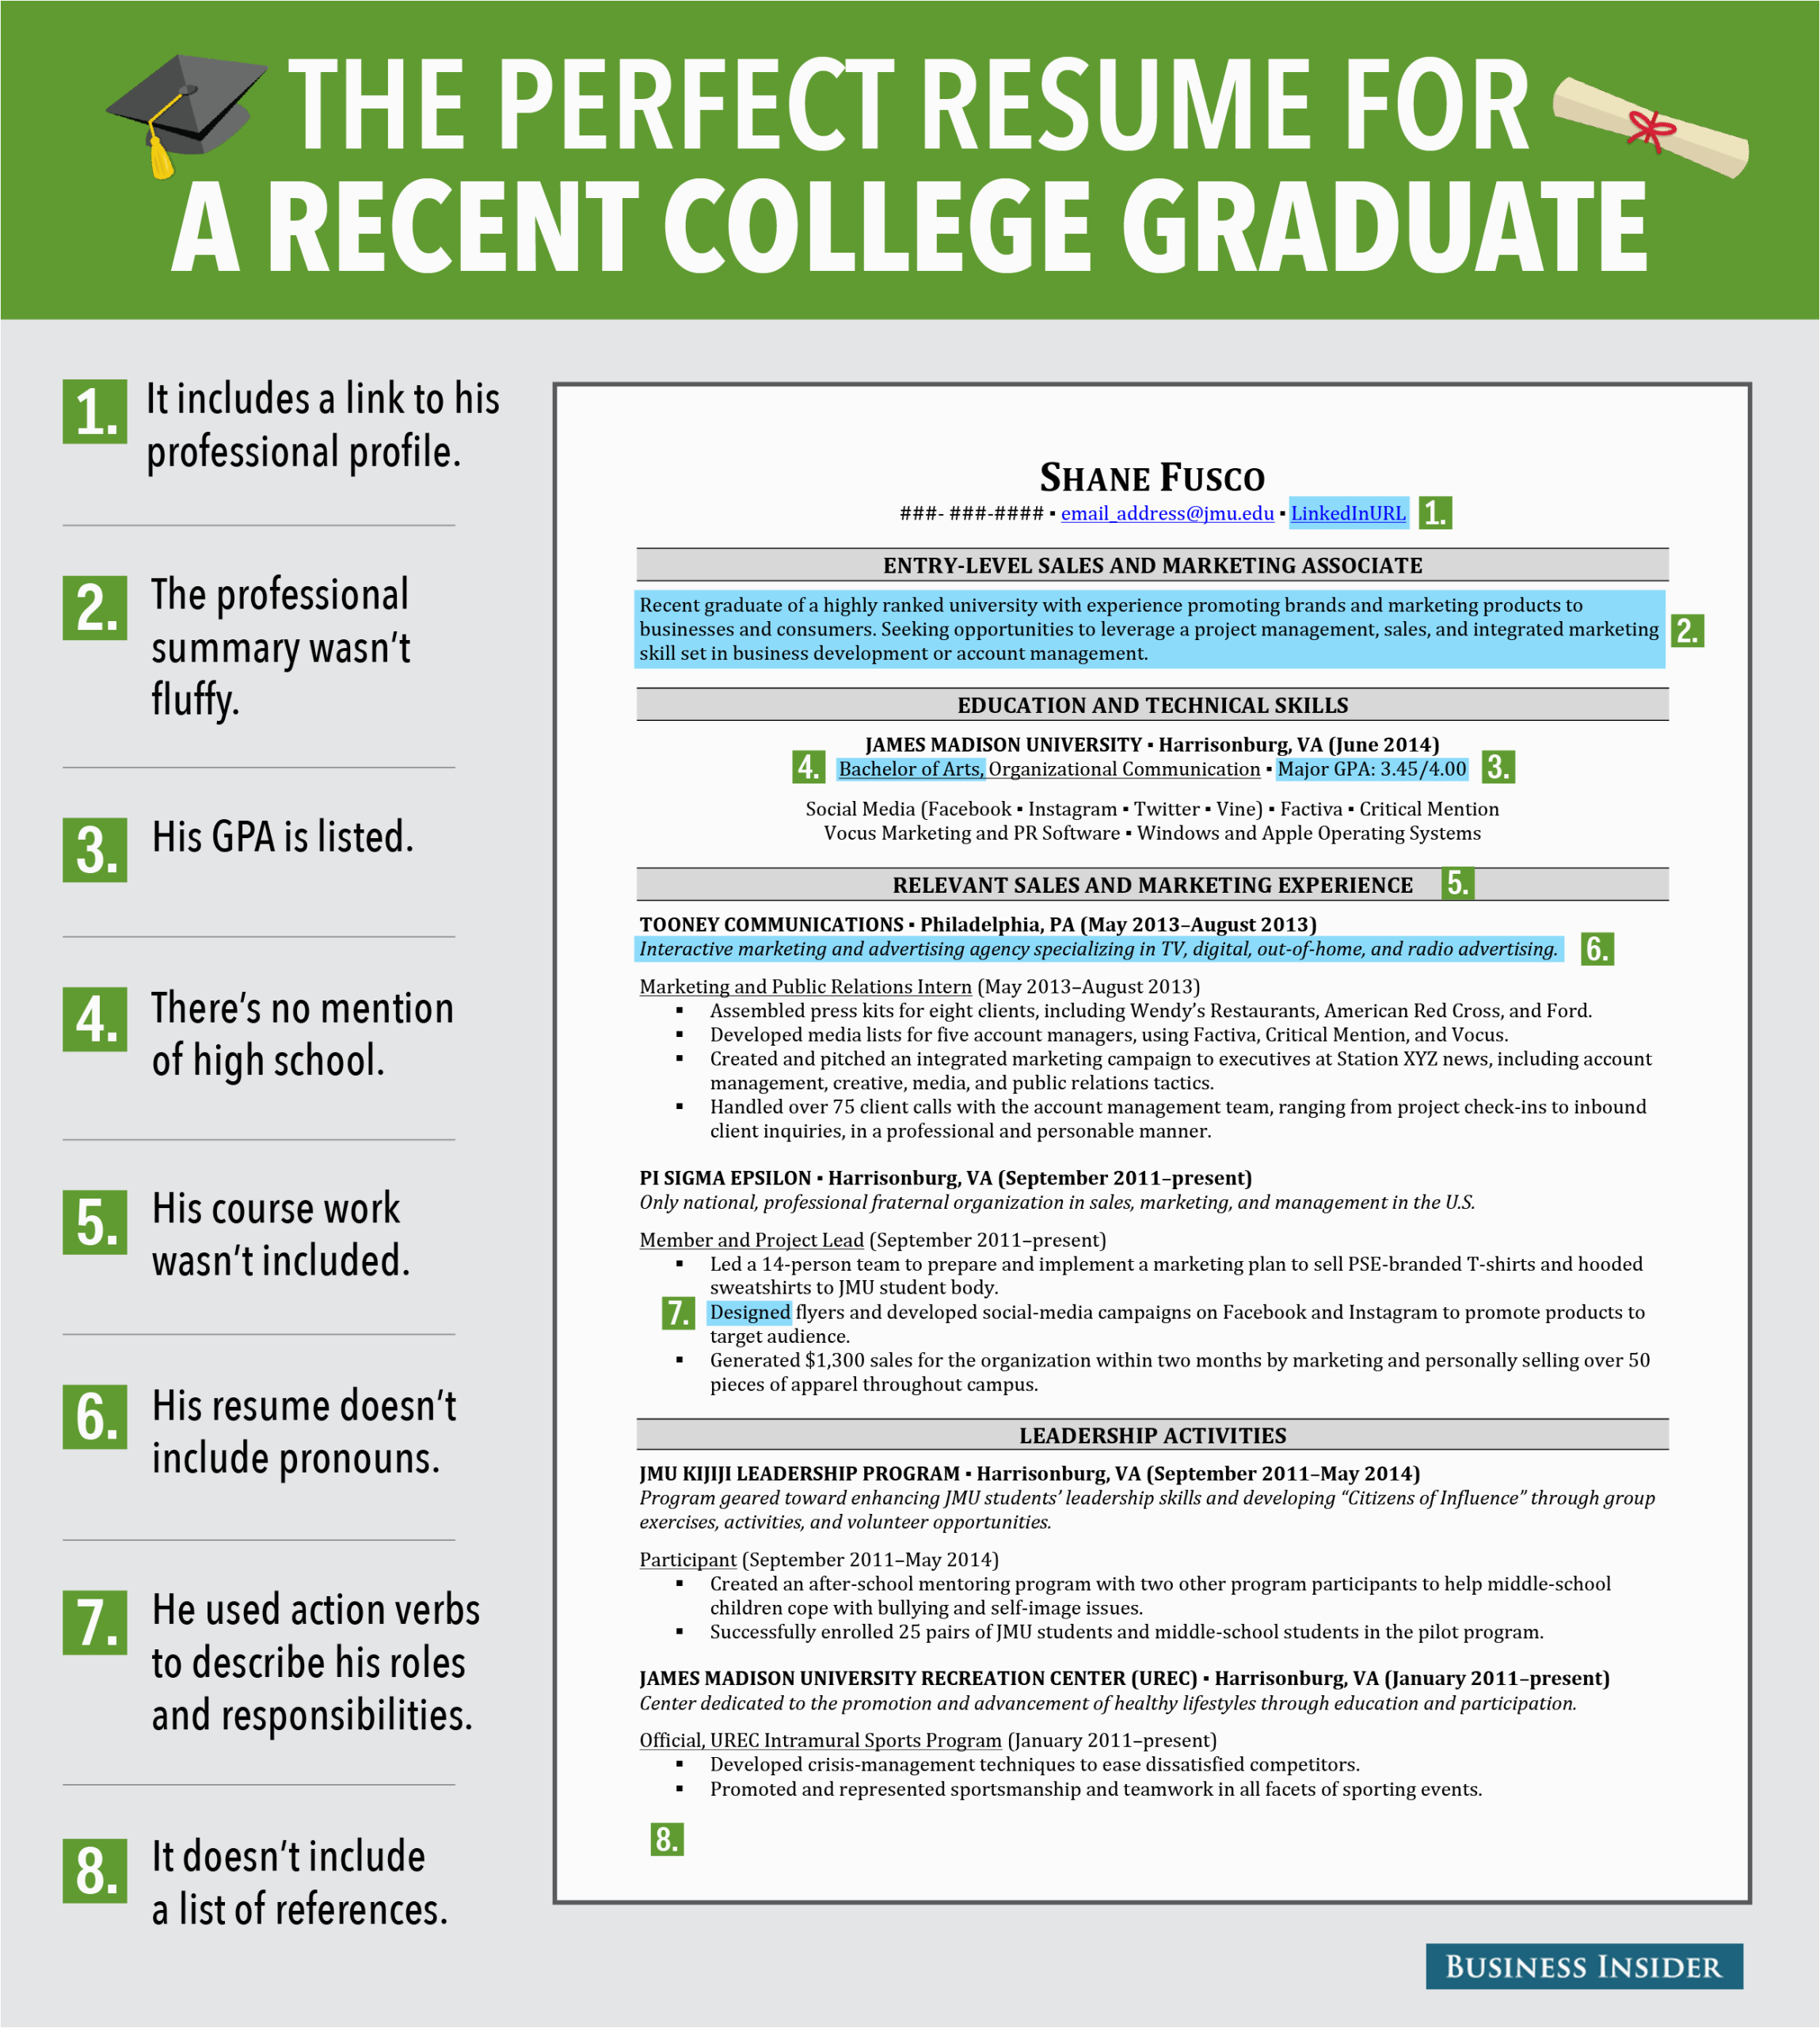 Sample Resume for Fresh College Graduate 8 Reasons This is An Excellent Resume for A Recent College